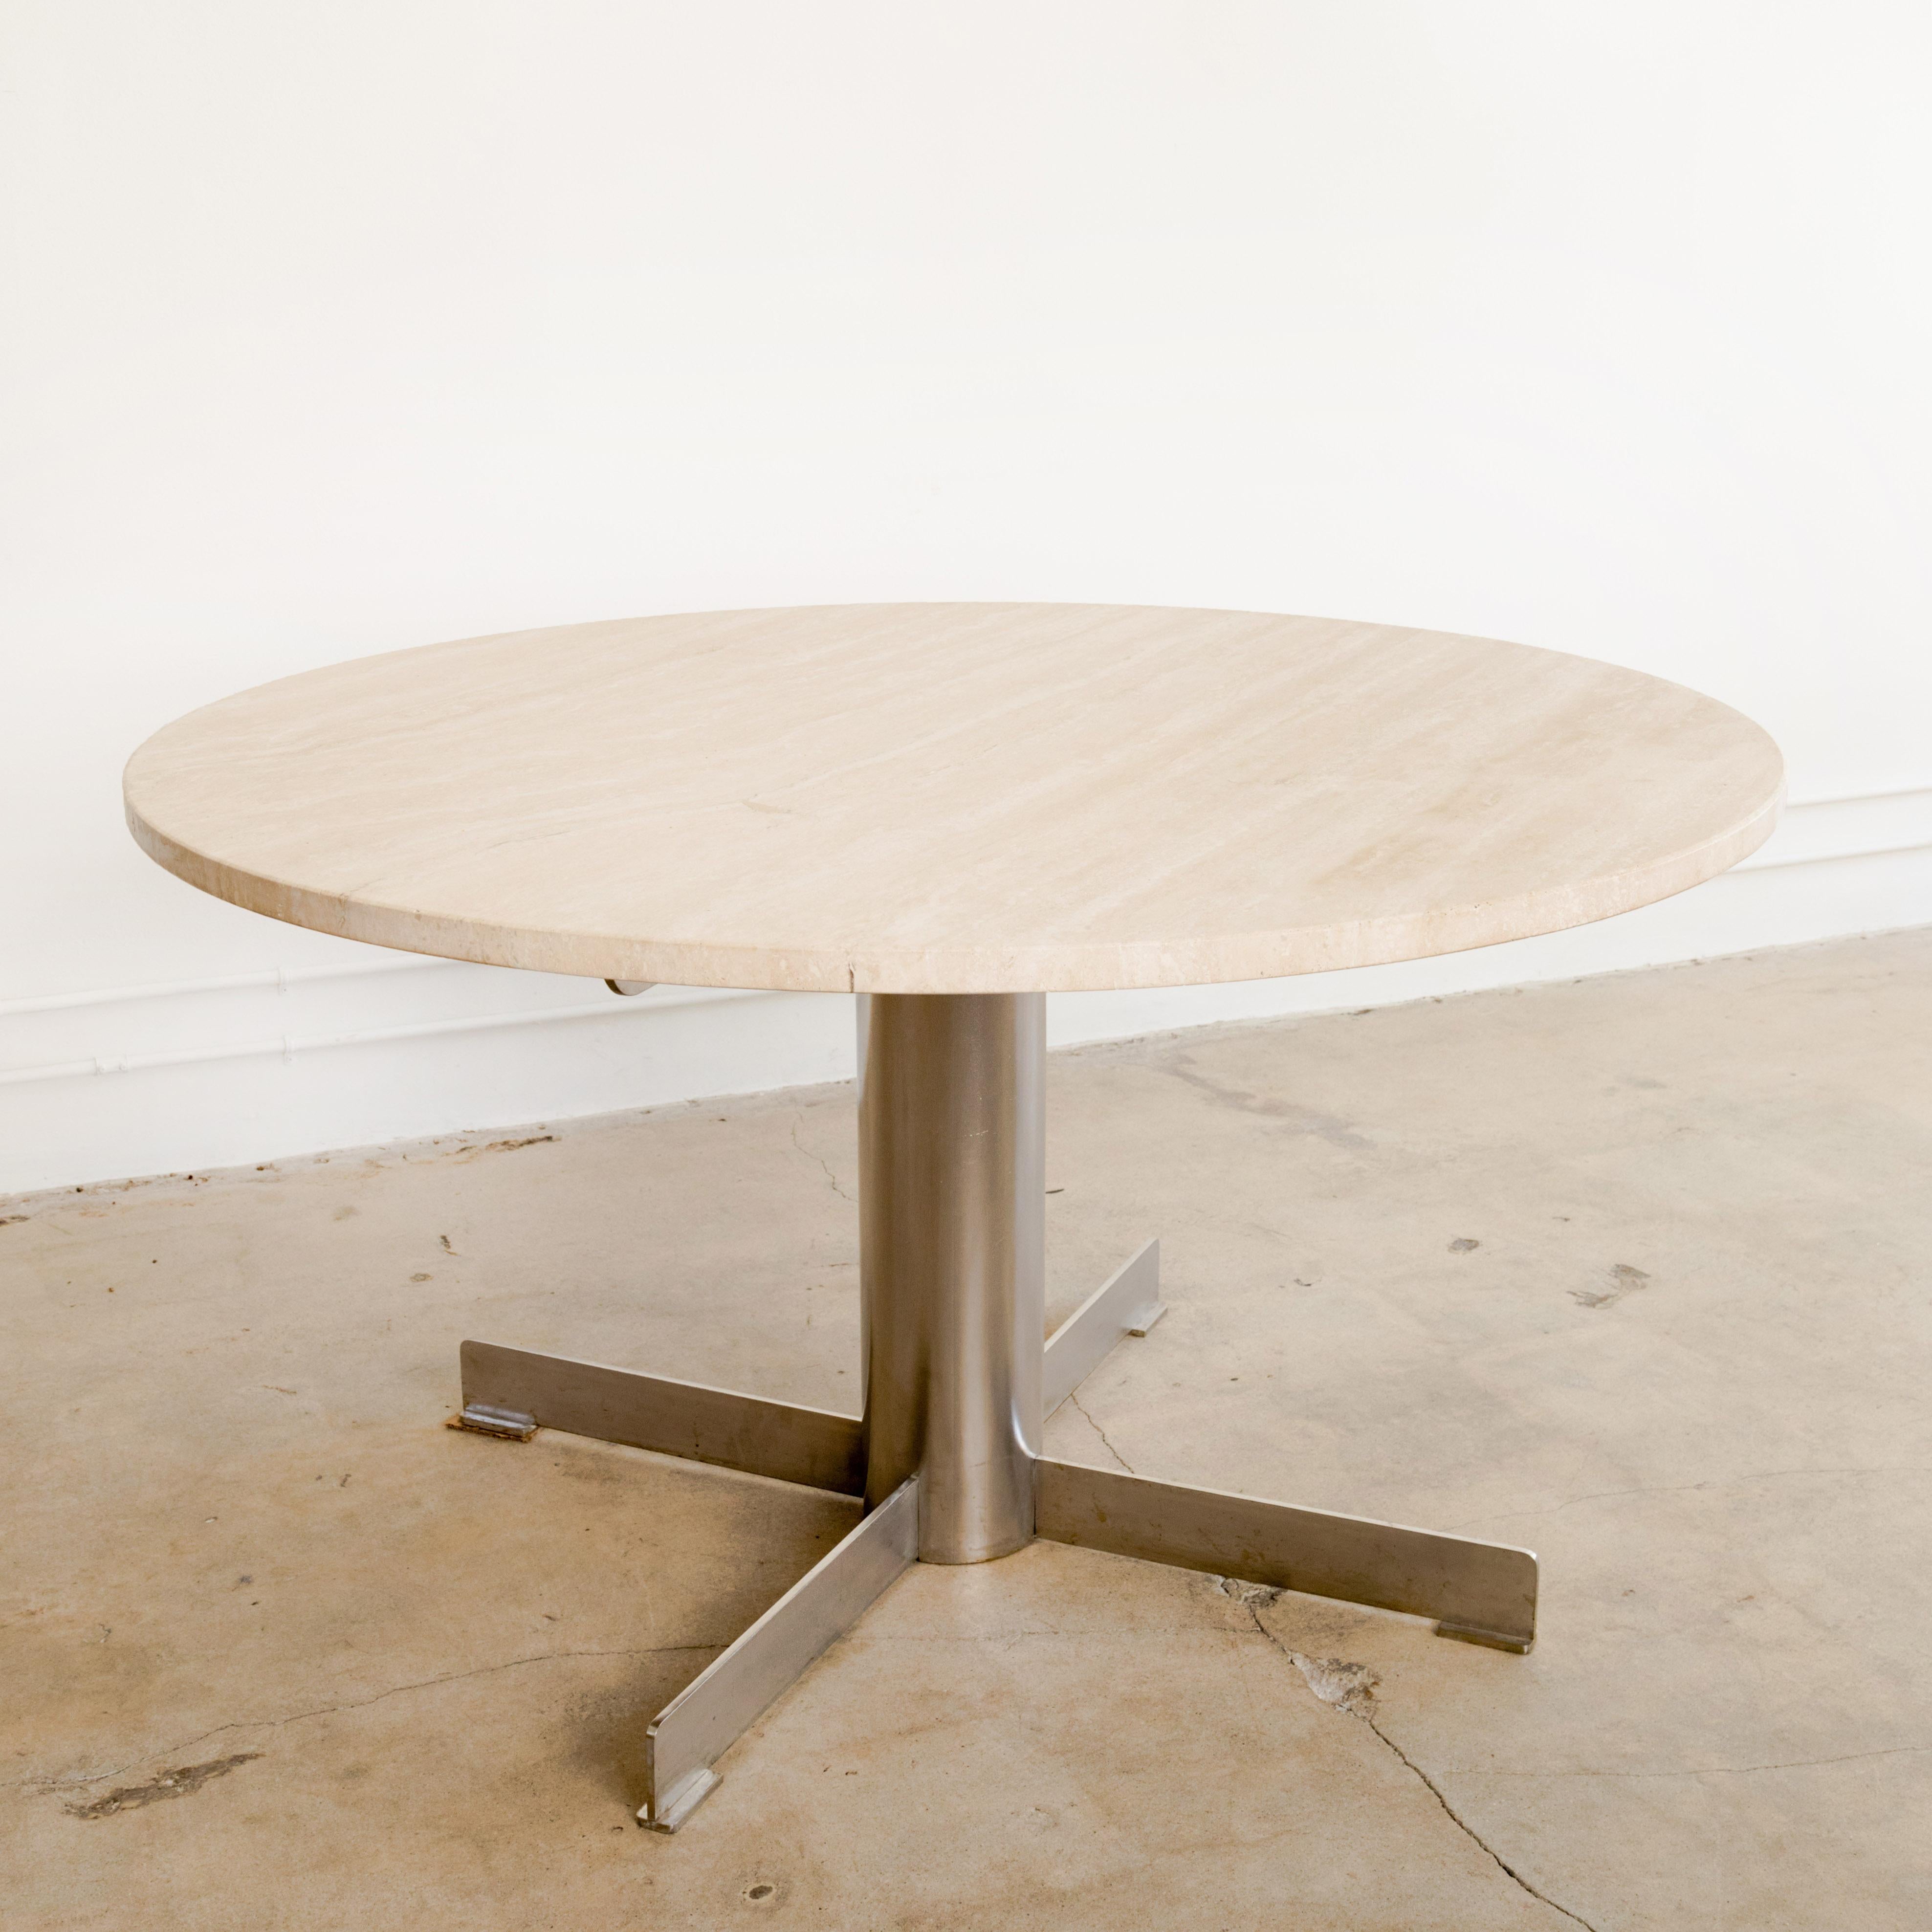 Round travertine top and chrome base pedestal dining table, France Circa 1970's.